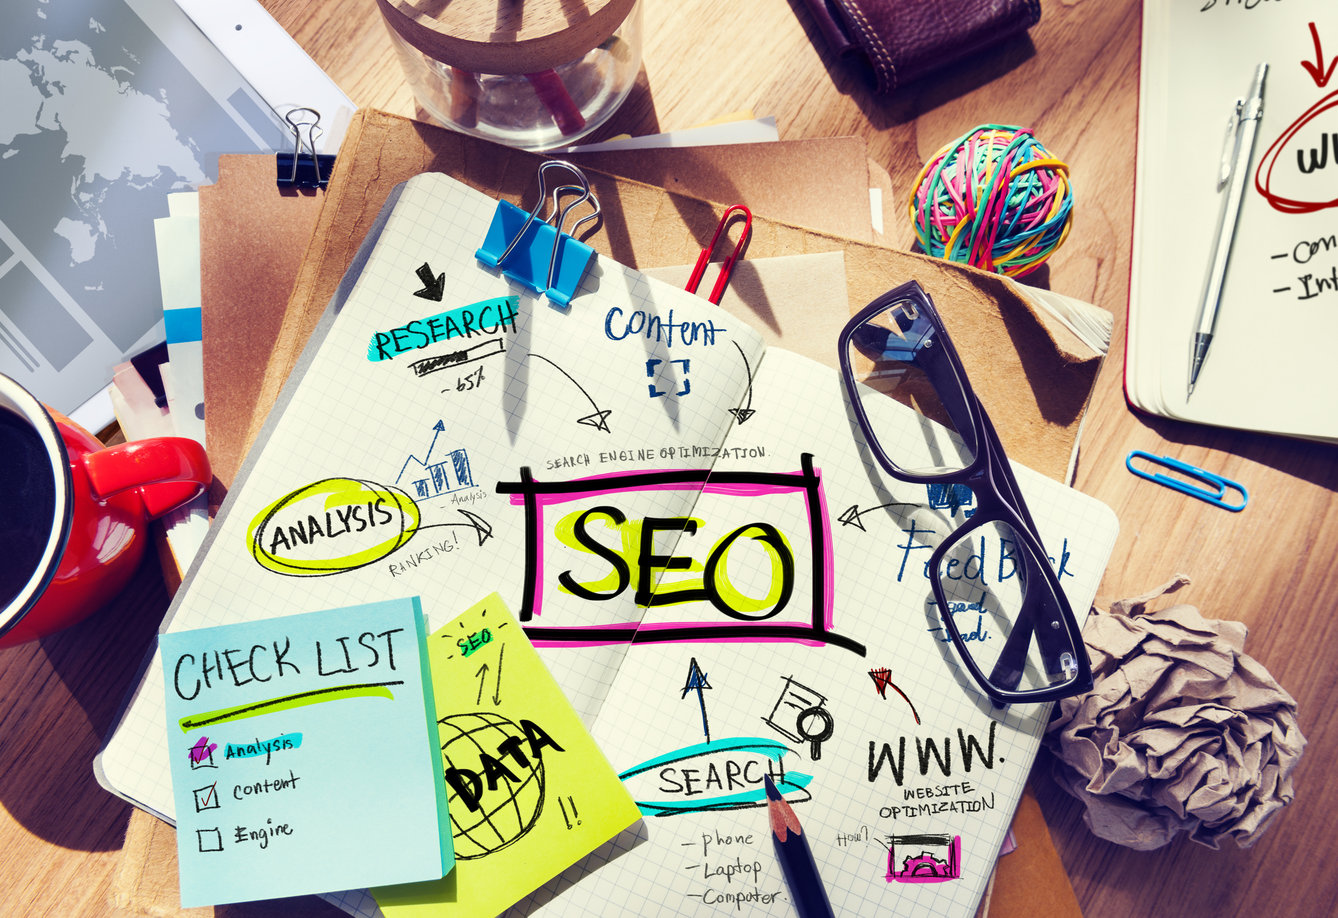 5 SEO Tactics to Increase Traffic to Your Website: Part 2